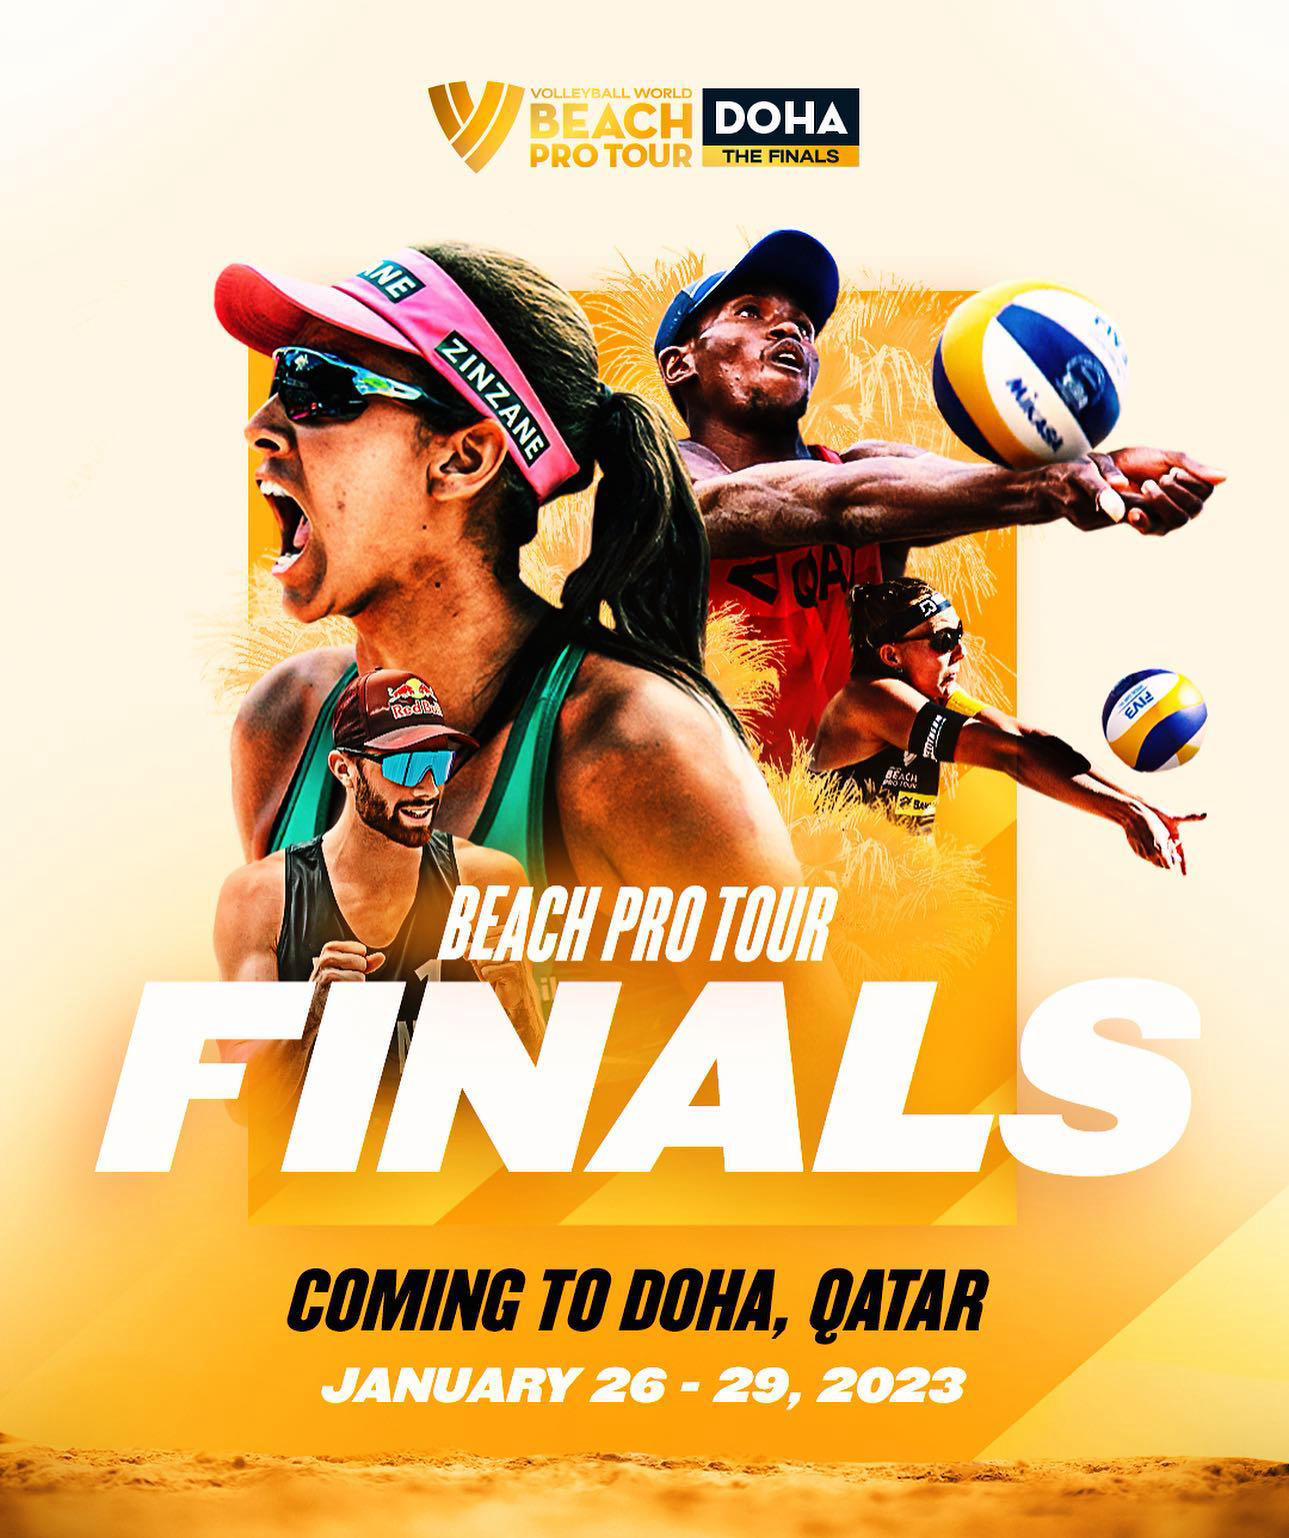 Volleyball World - #BeachProTour FINALS IN DOHA 🇶🇦